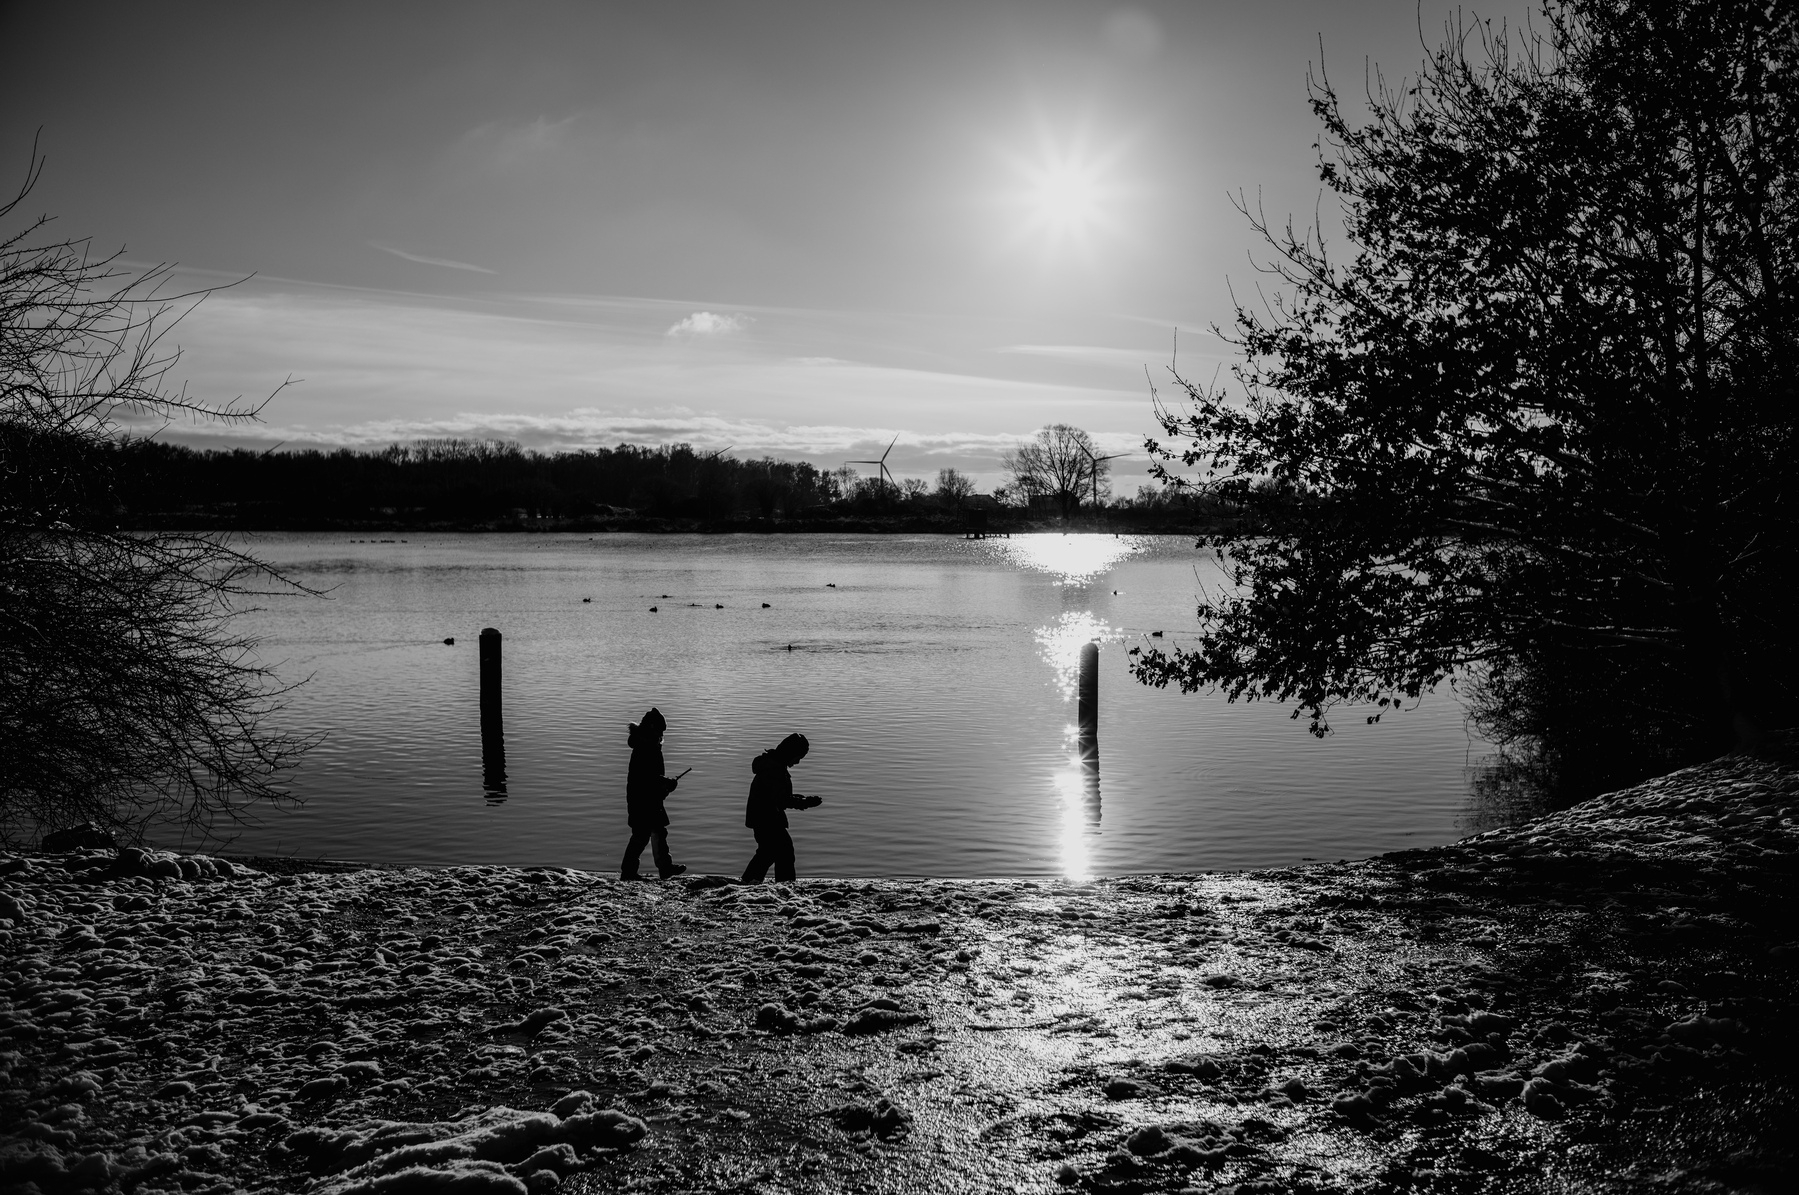 Children playing at the river, surrounded by ice and snow